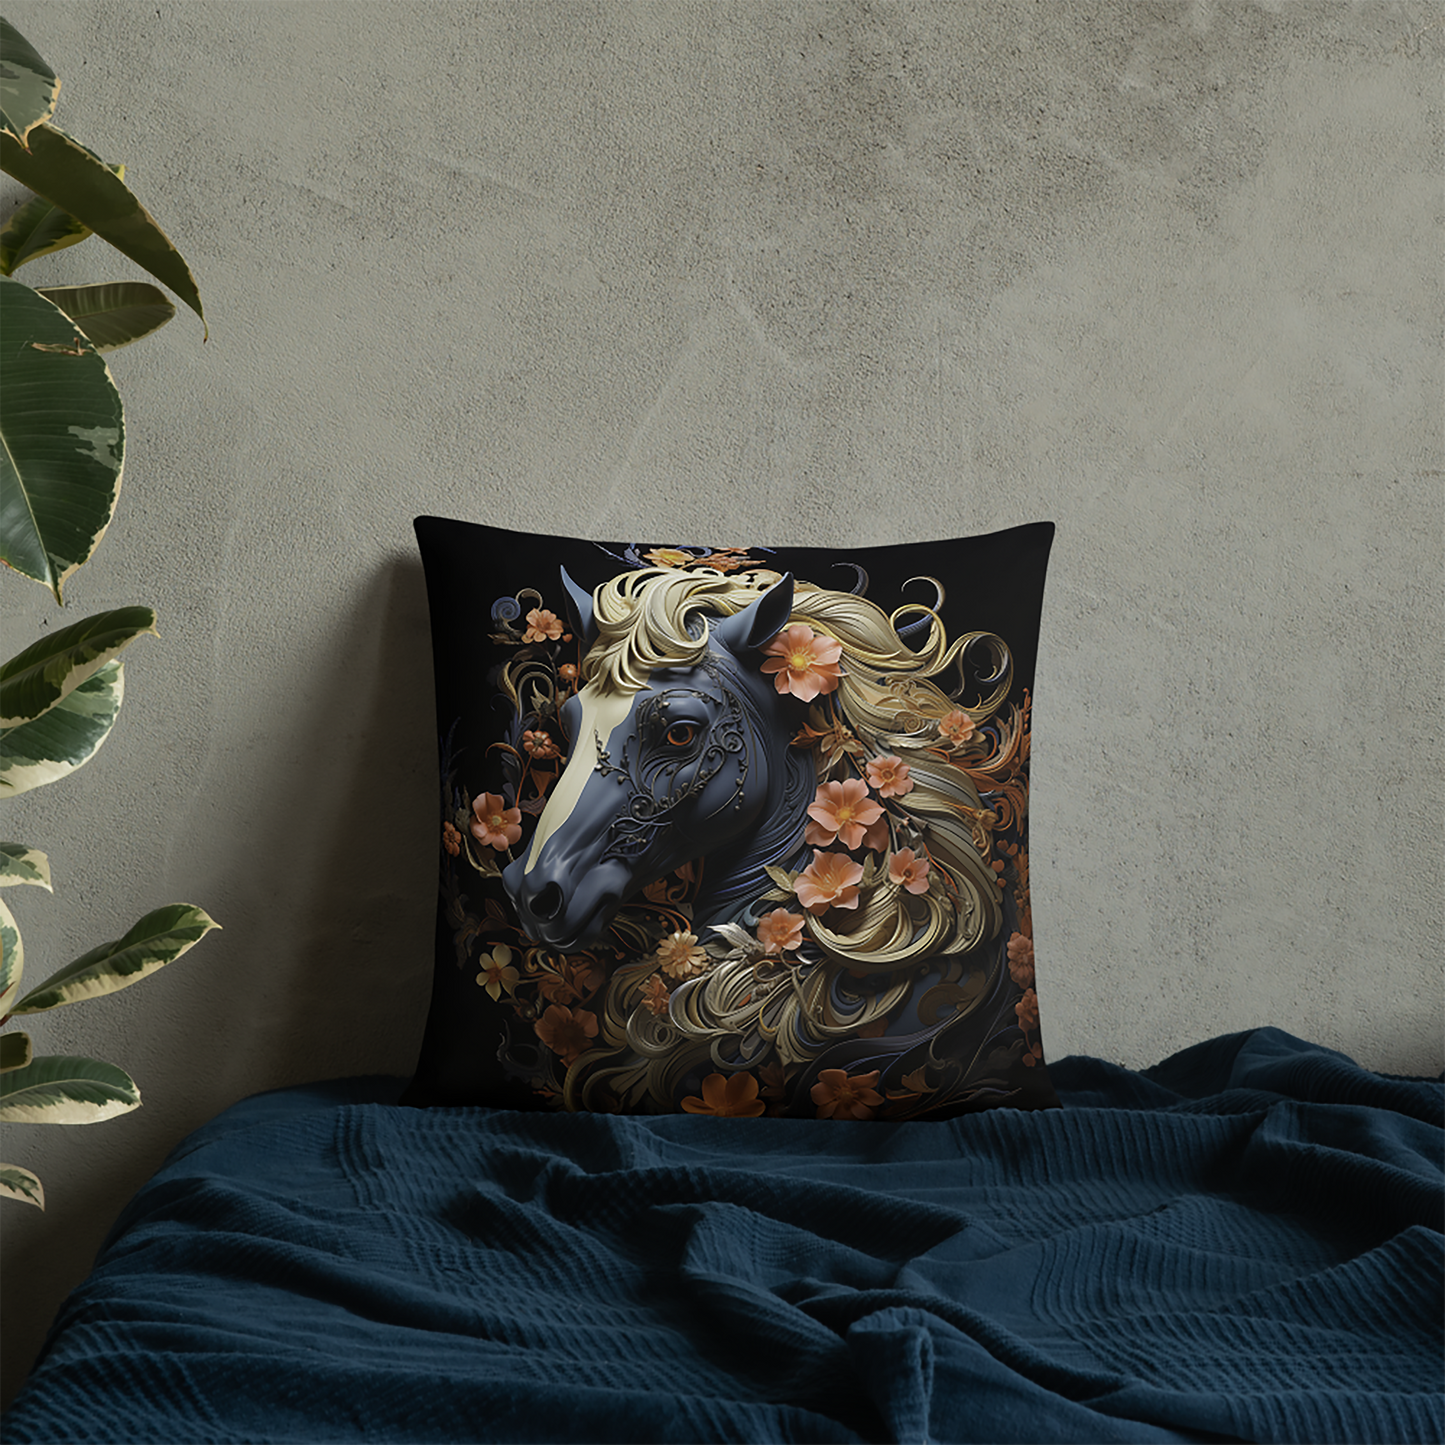 Horse Throw Pillow Horse and Floral Mandala Comfort Polyester Decorative Cushion 18x18